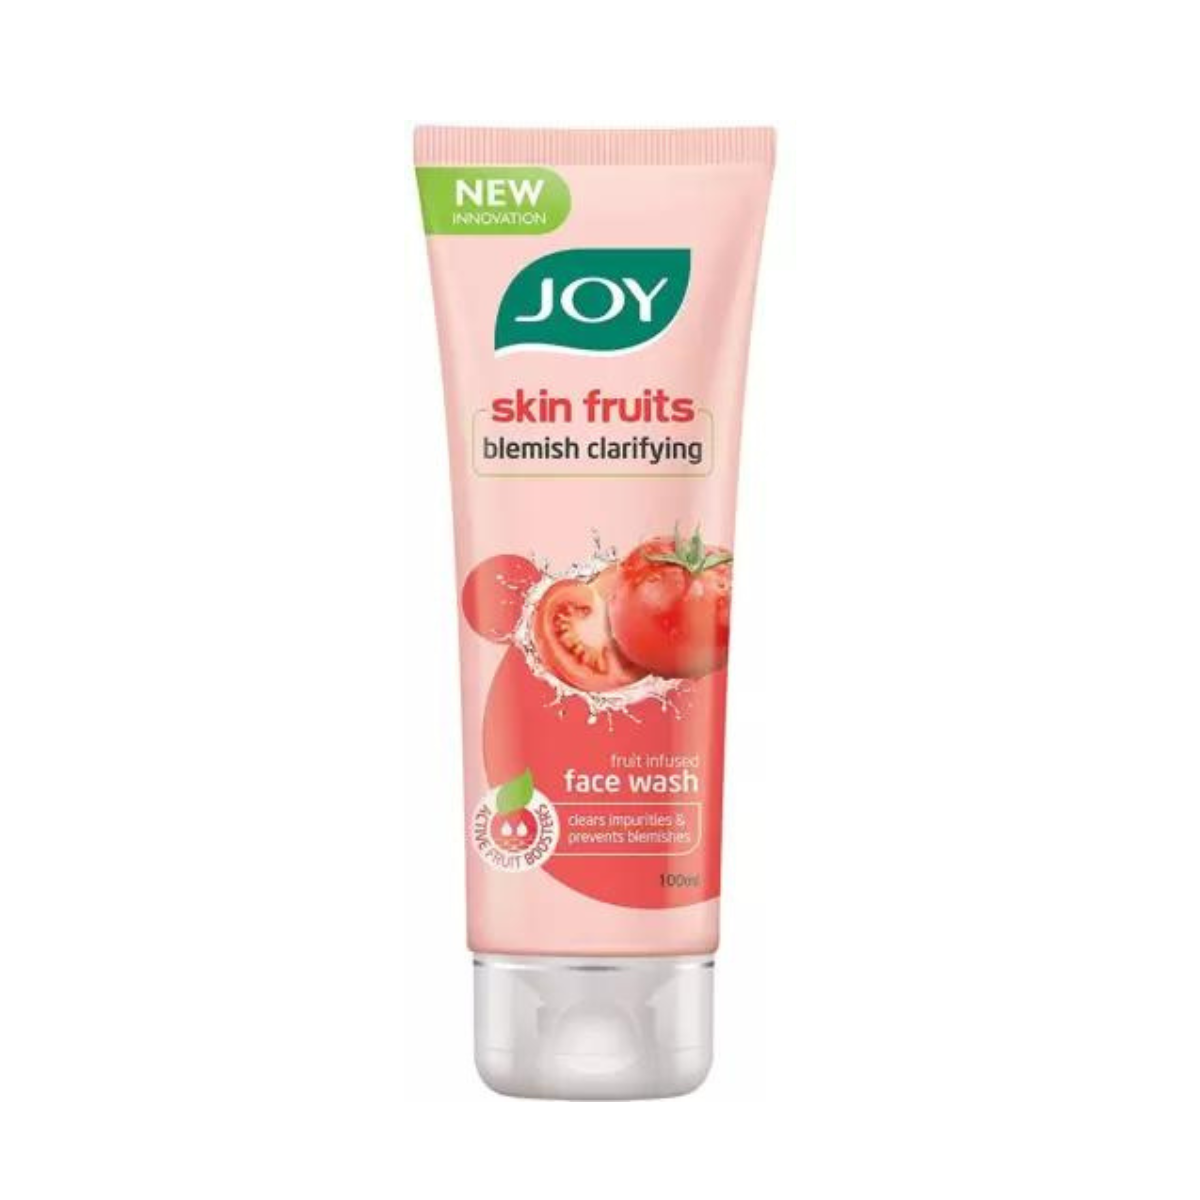 Joy Skin Fruits Blemish Clarifying - Fruit Infused Face wash - Clears Impurities & Prevents Blemishes - 100ml